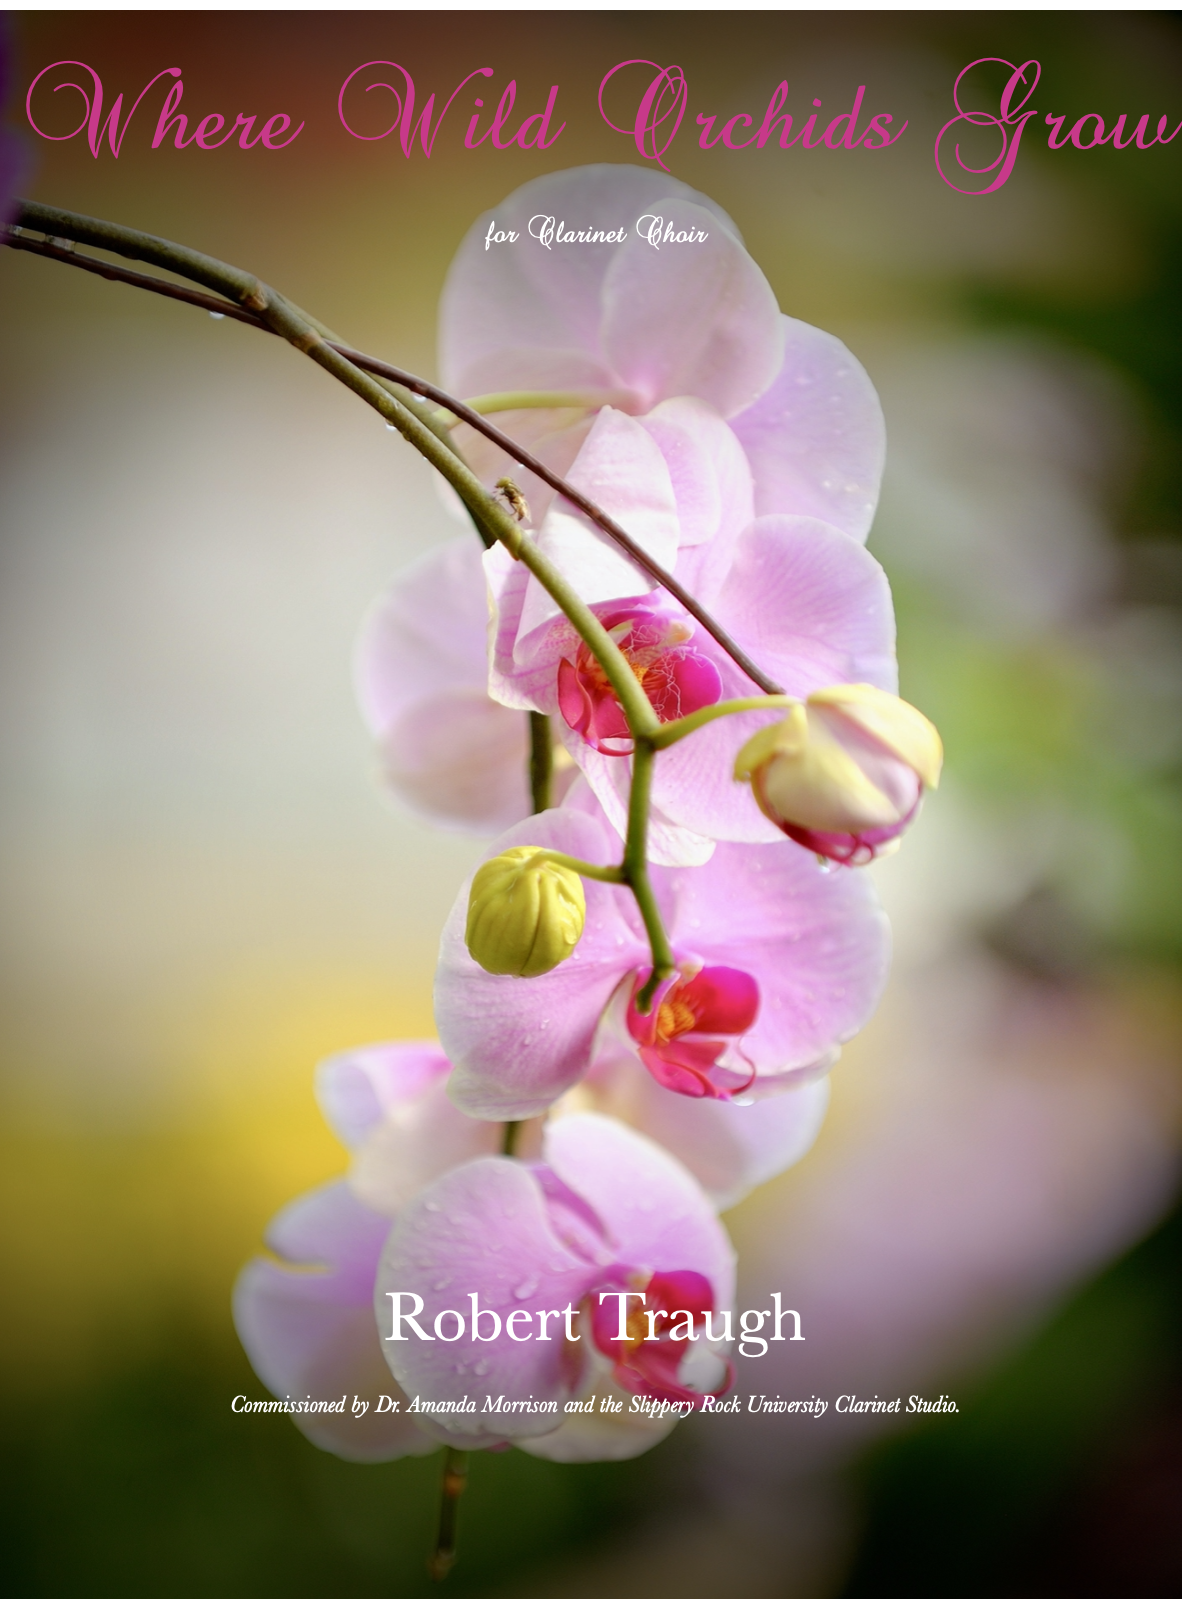 Where Wild Orchids Grow by Robert Traugh